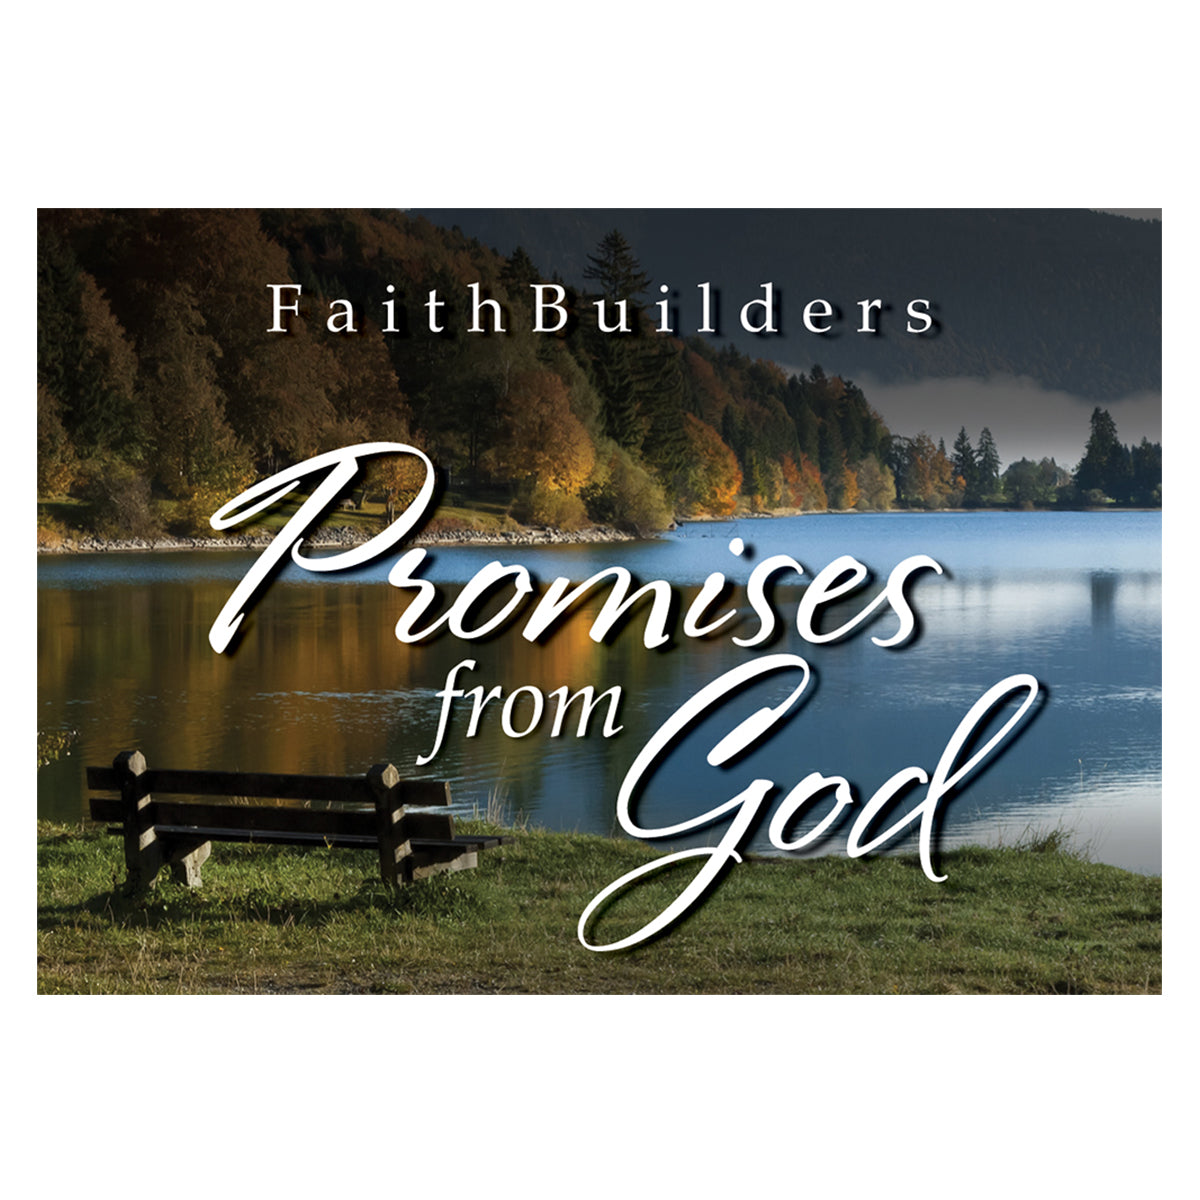 Image of Promises from God Faithbuilders other